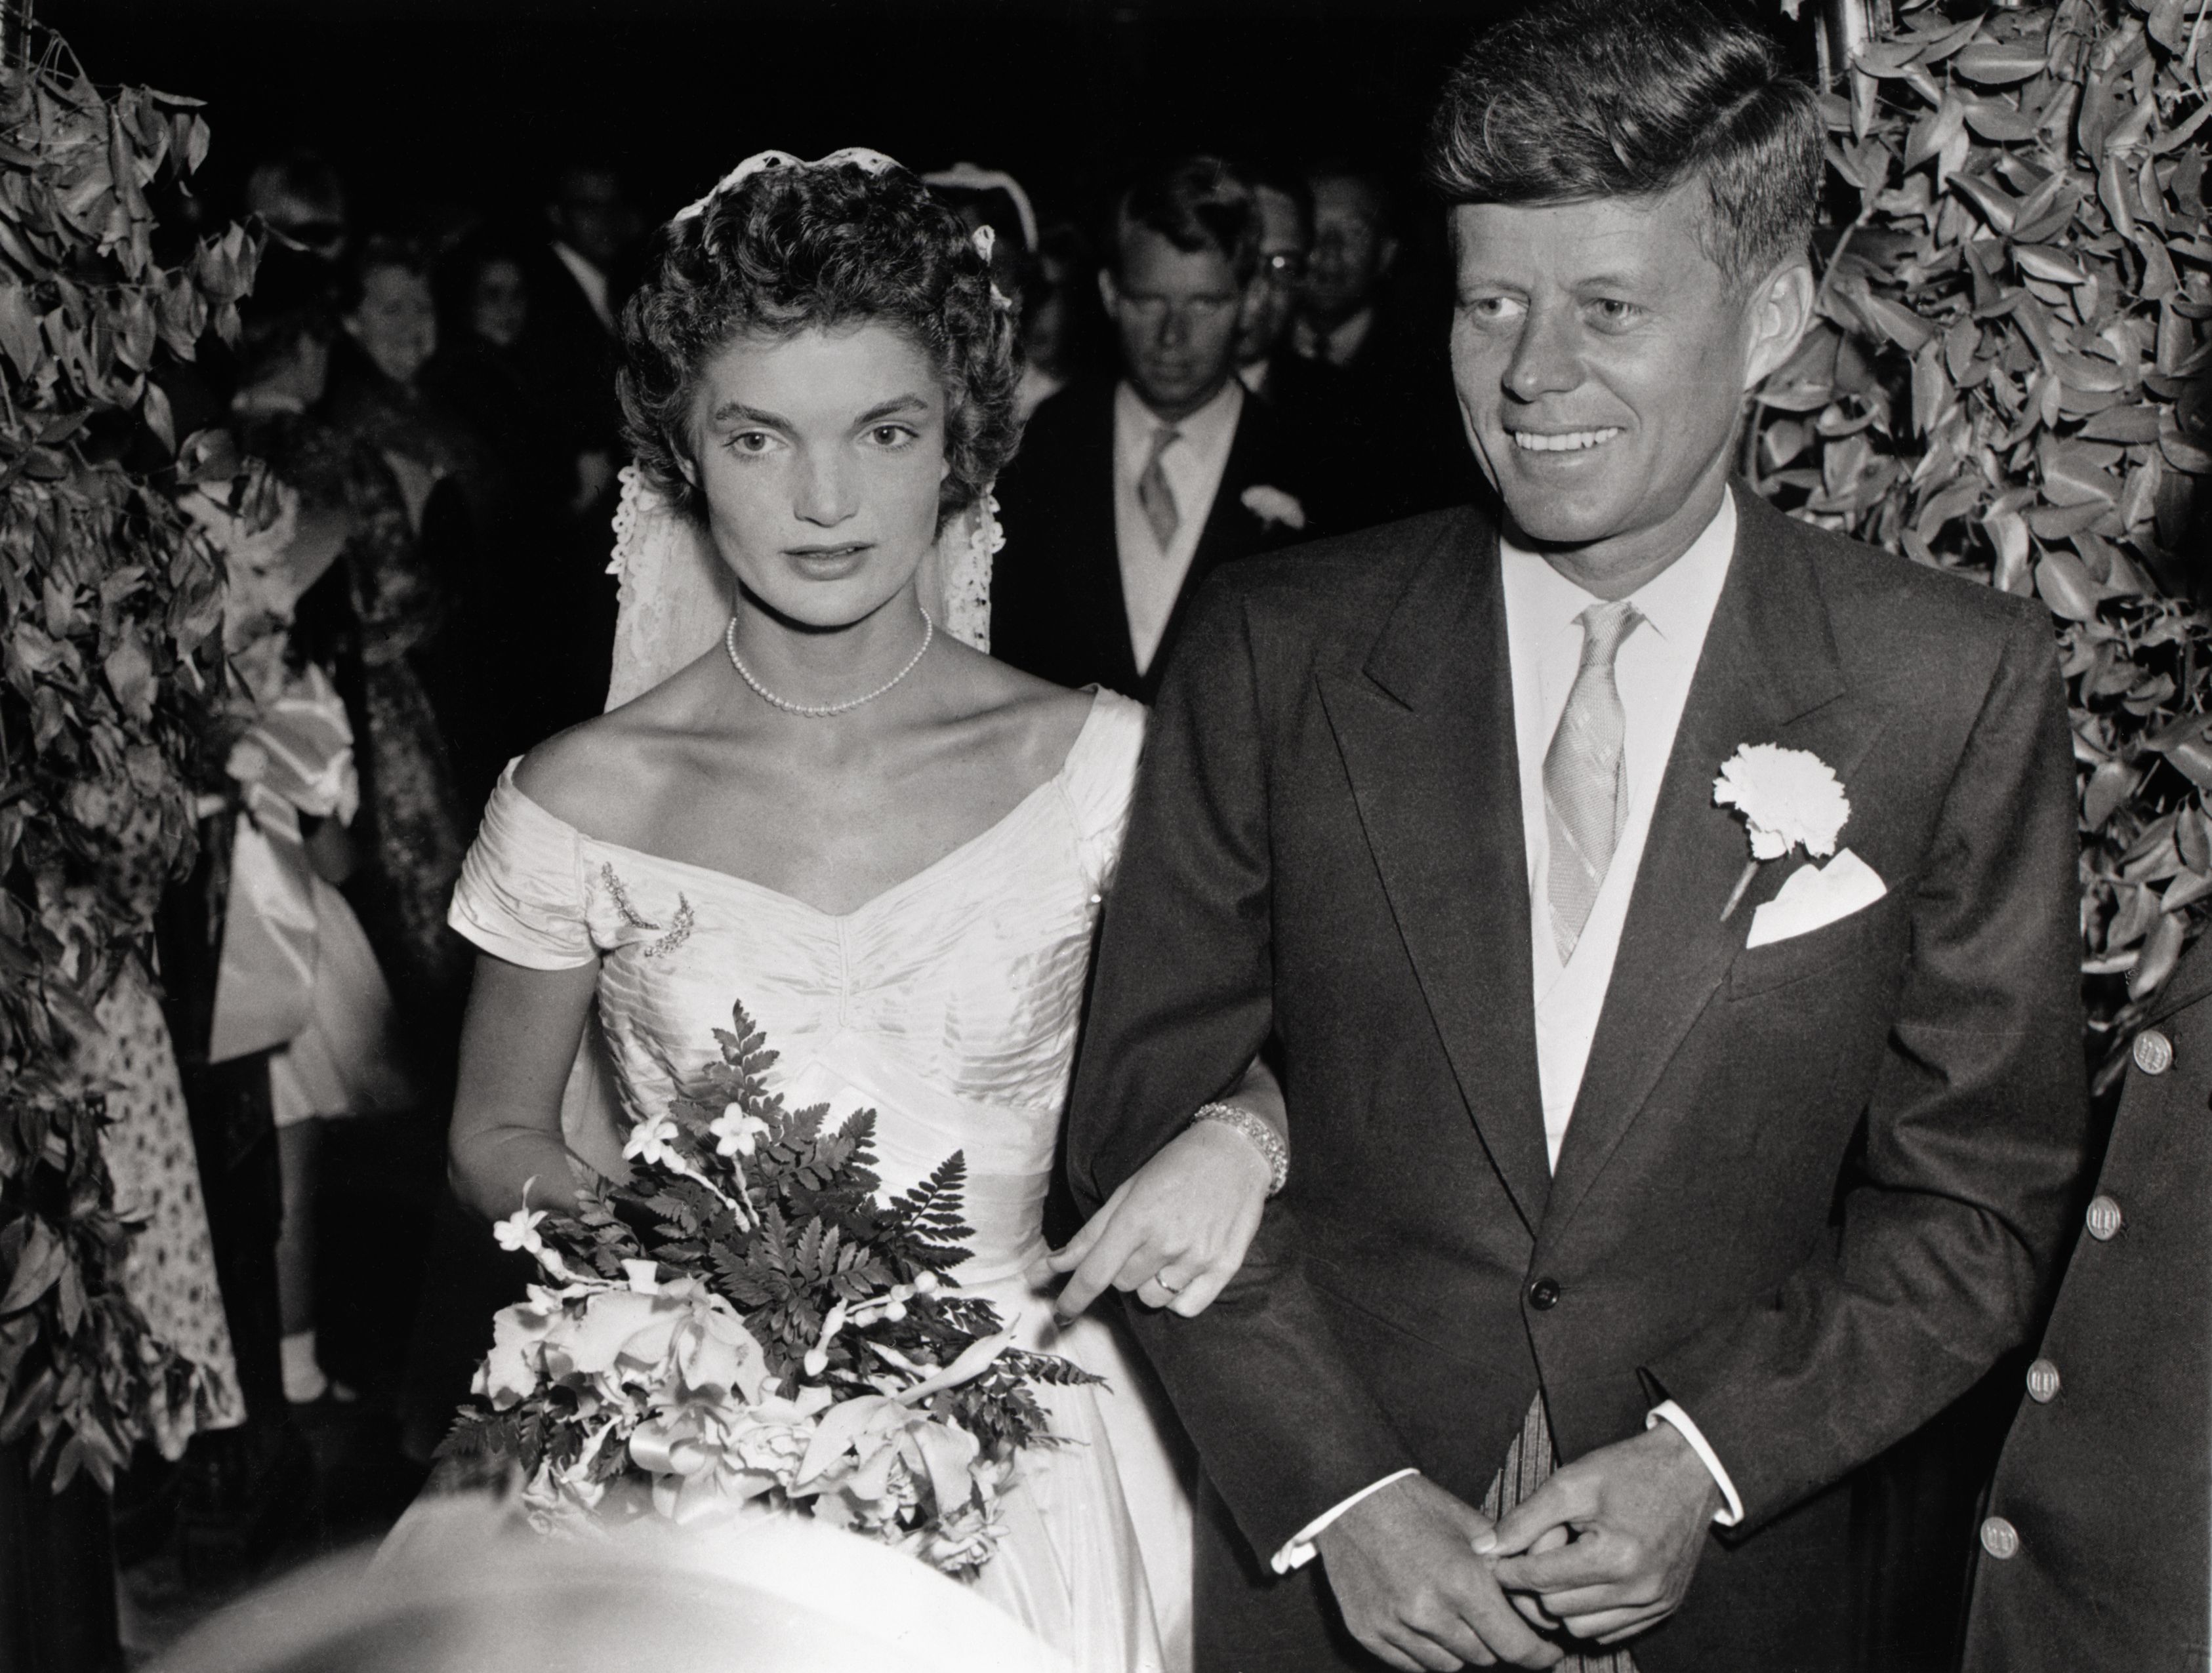 Jacqueline Lee Bouvier and John F. Kennedy wed on September 12, 1953, in St. Mary's Church in Newport, Rhode Island. | Source: Bettmann/Getty Images 